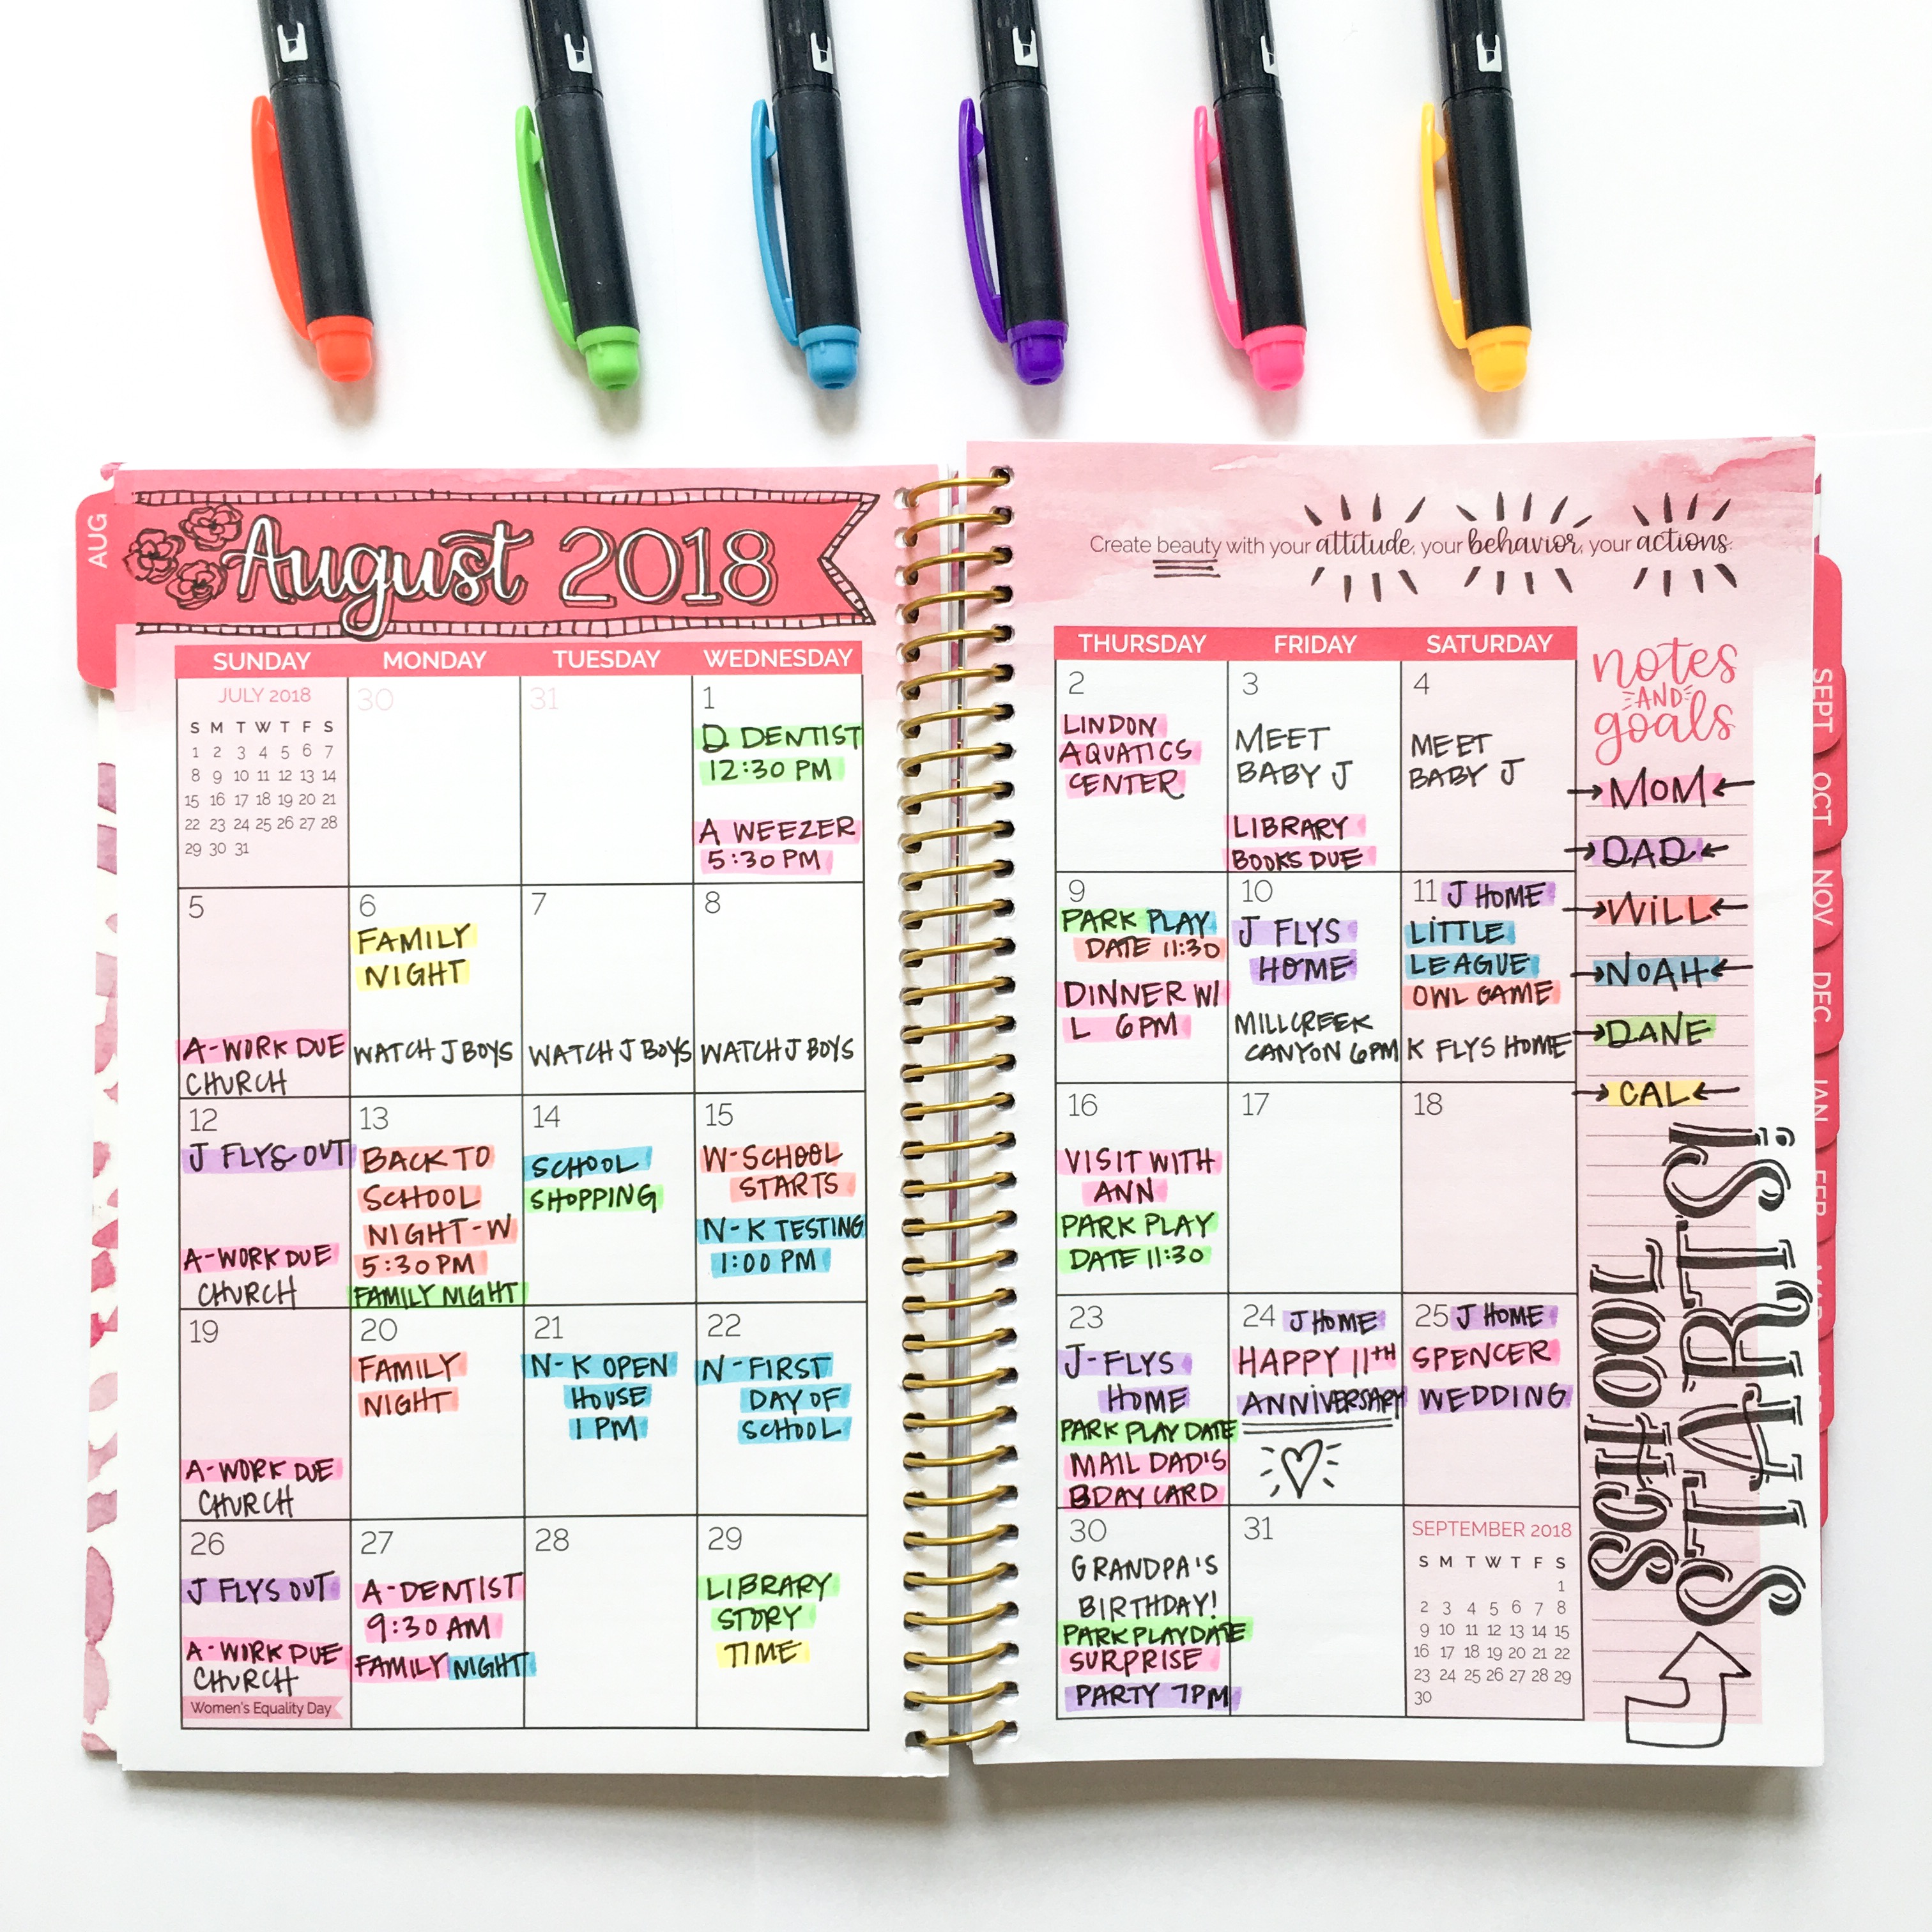 bloom-daily-planners-free-printable-roles-and-goals-weekly-scheduler-free-8-5-x-11-pdf-free